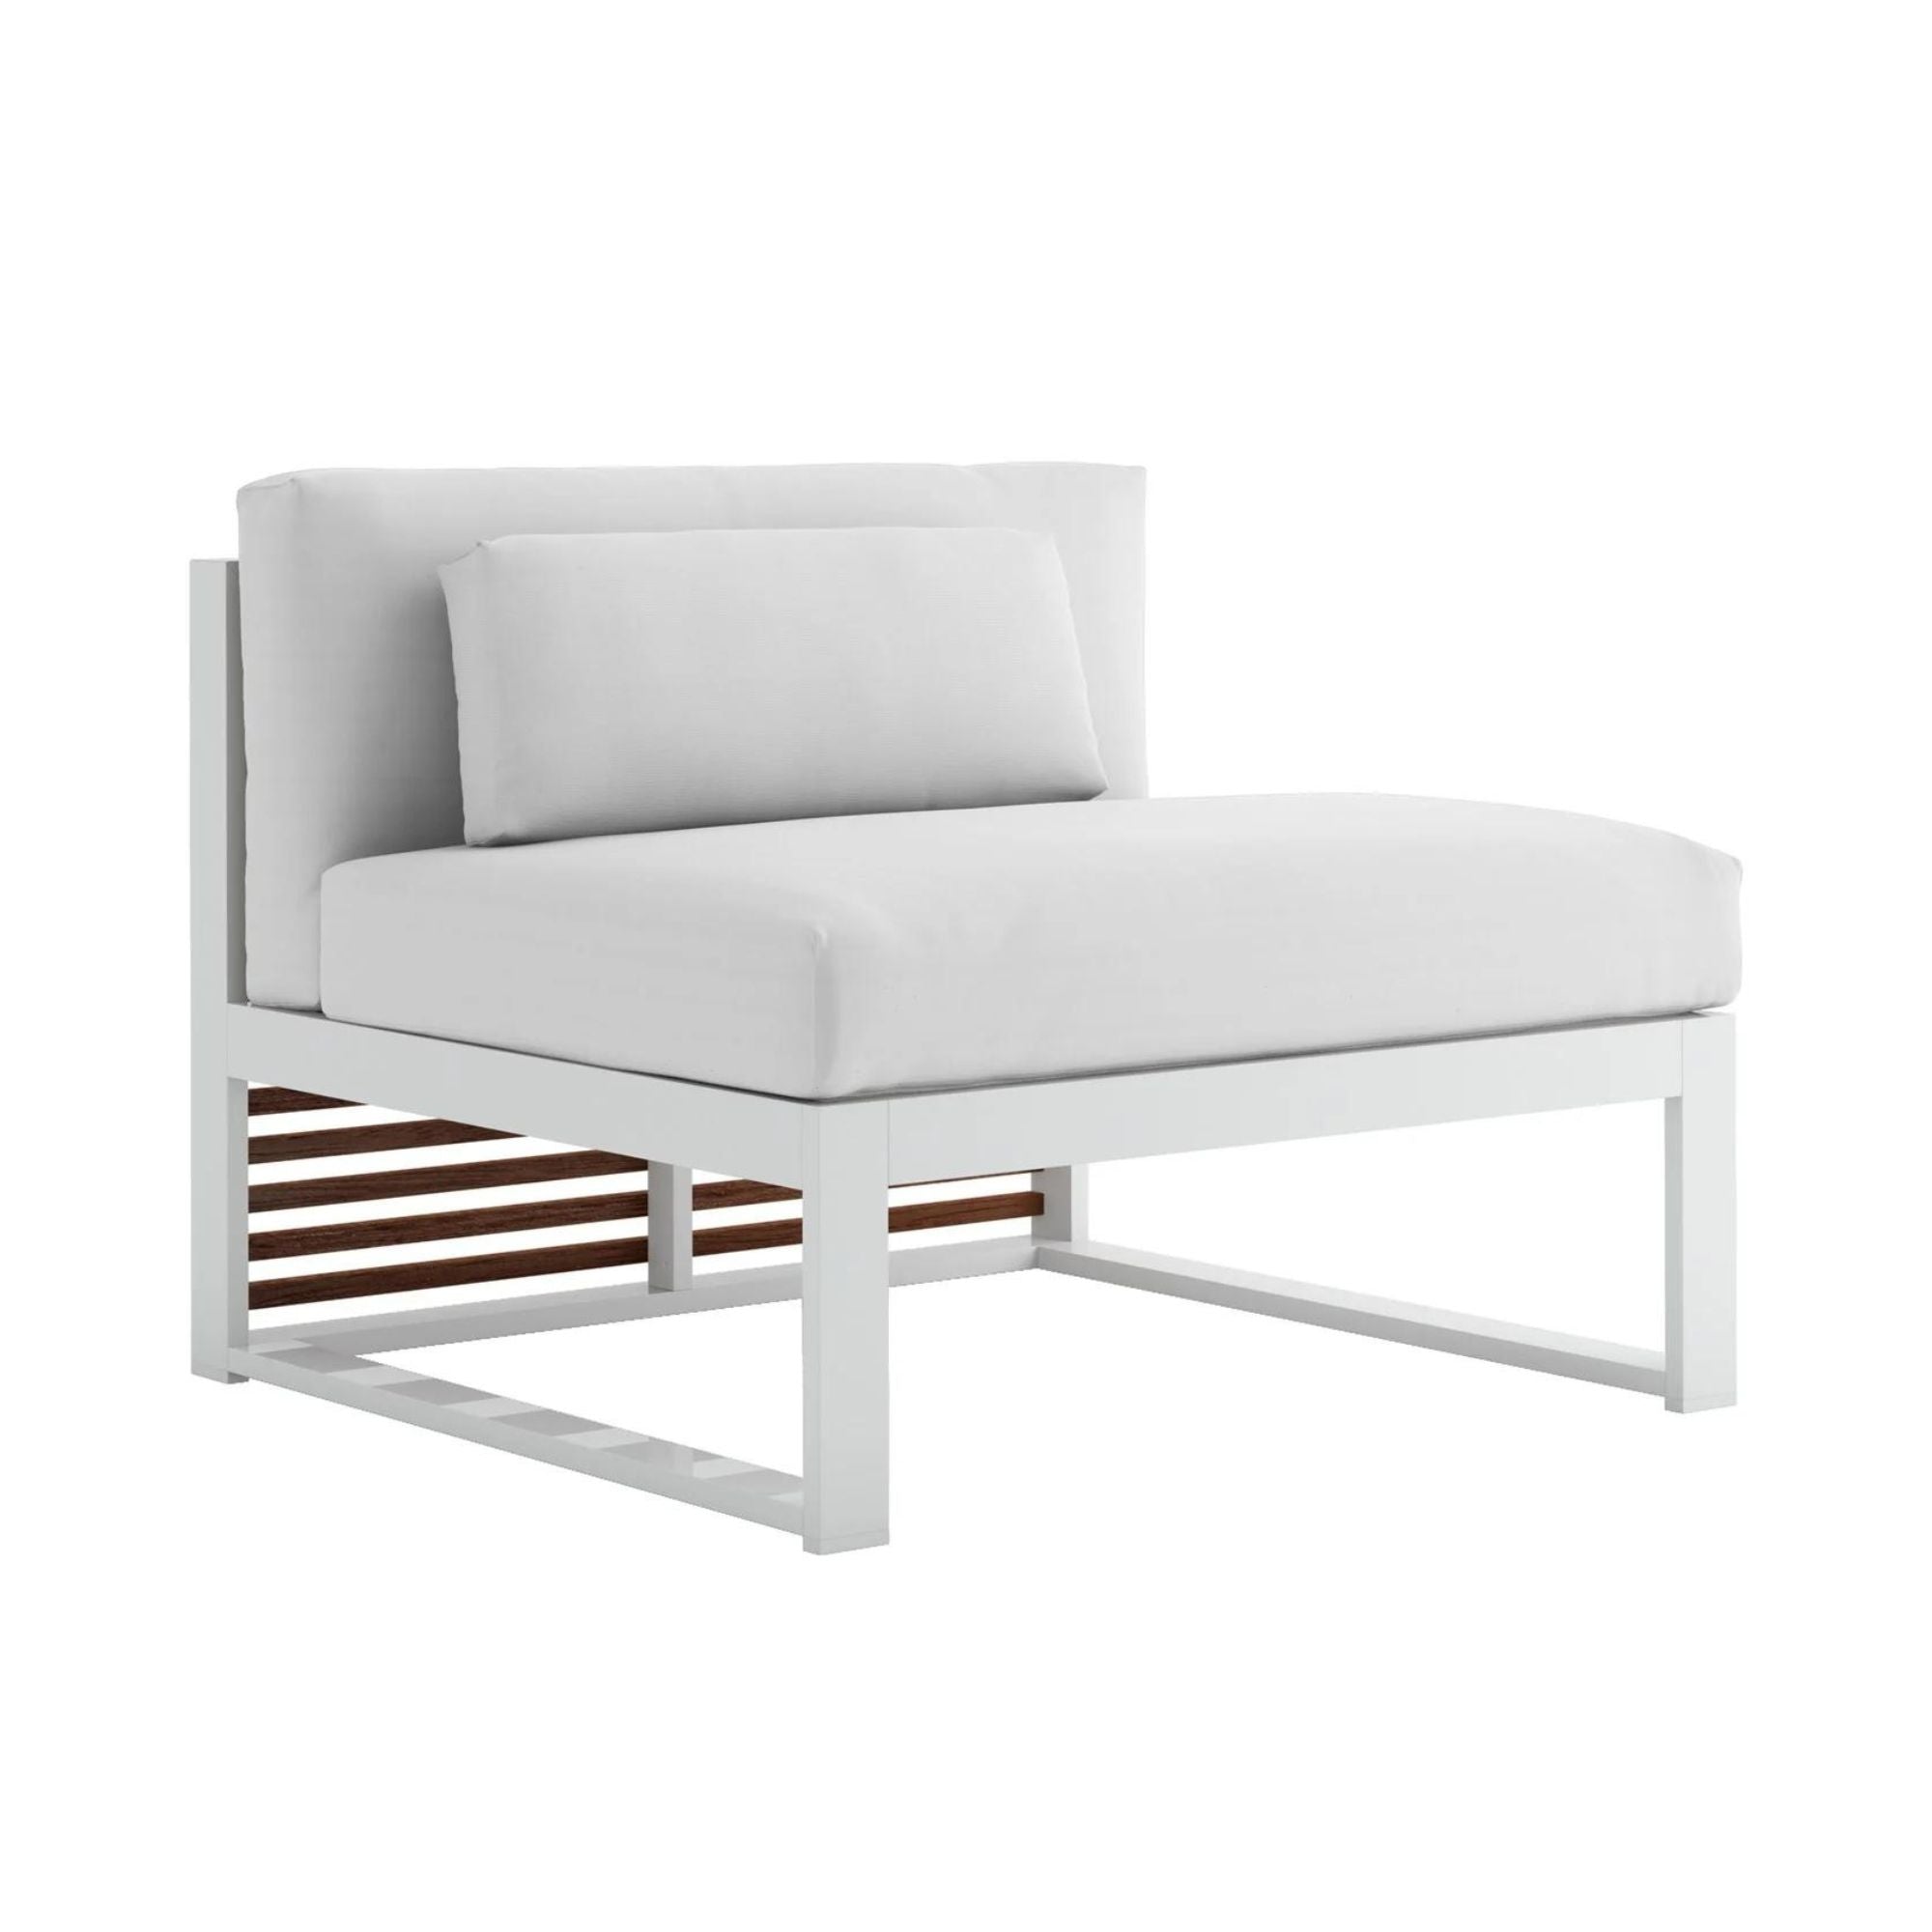 DNA Teak Sectional 3 - THAT COOL LIVING